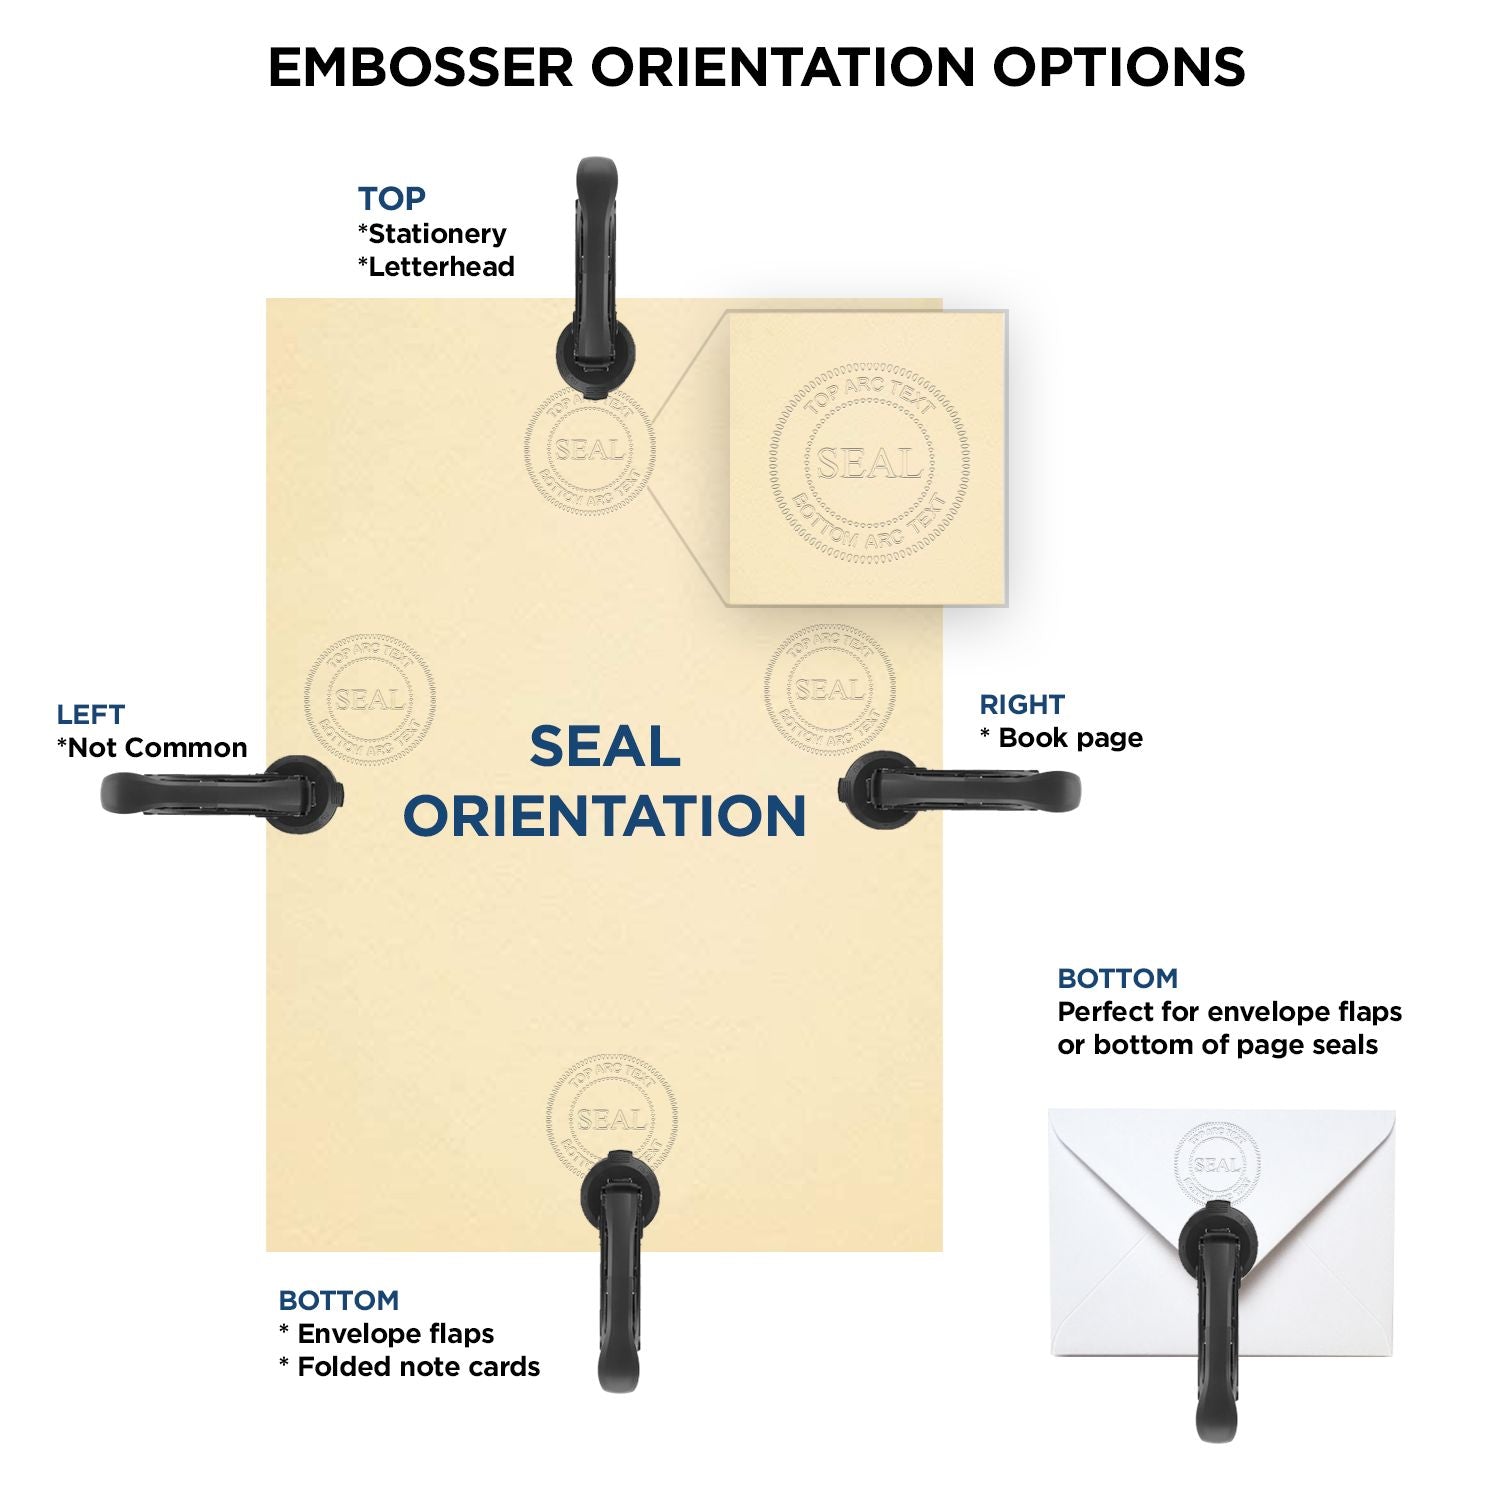 An infographic for the Heavy Duty Cast Iron Virginia Land Surveyor Seal Embosser showing embosser orientation, this is showing examples of a top, bottom, right and left insert.